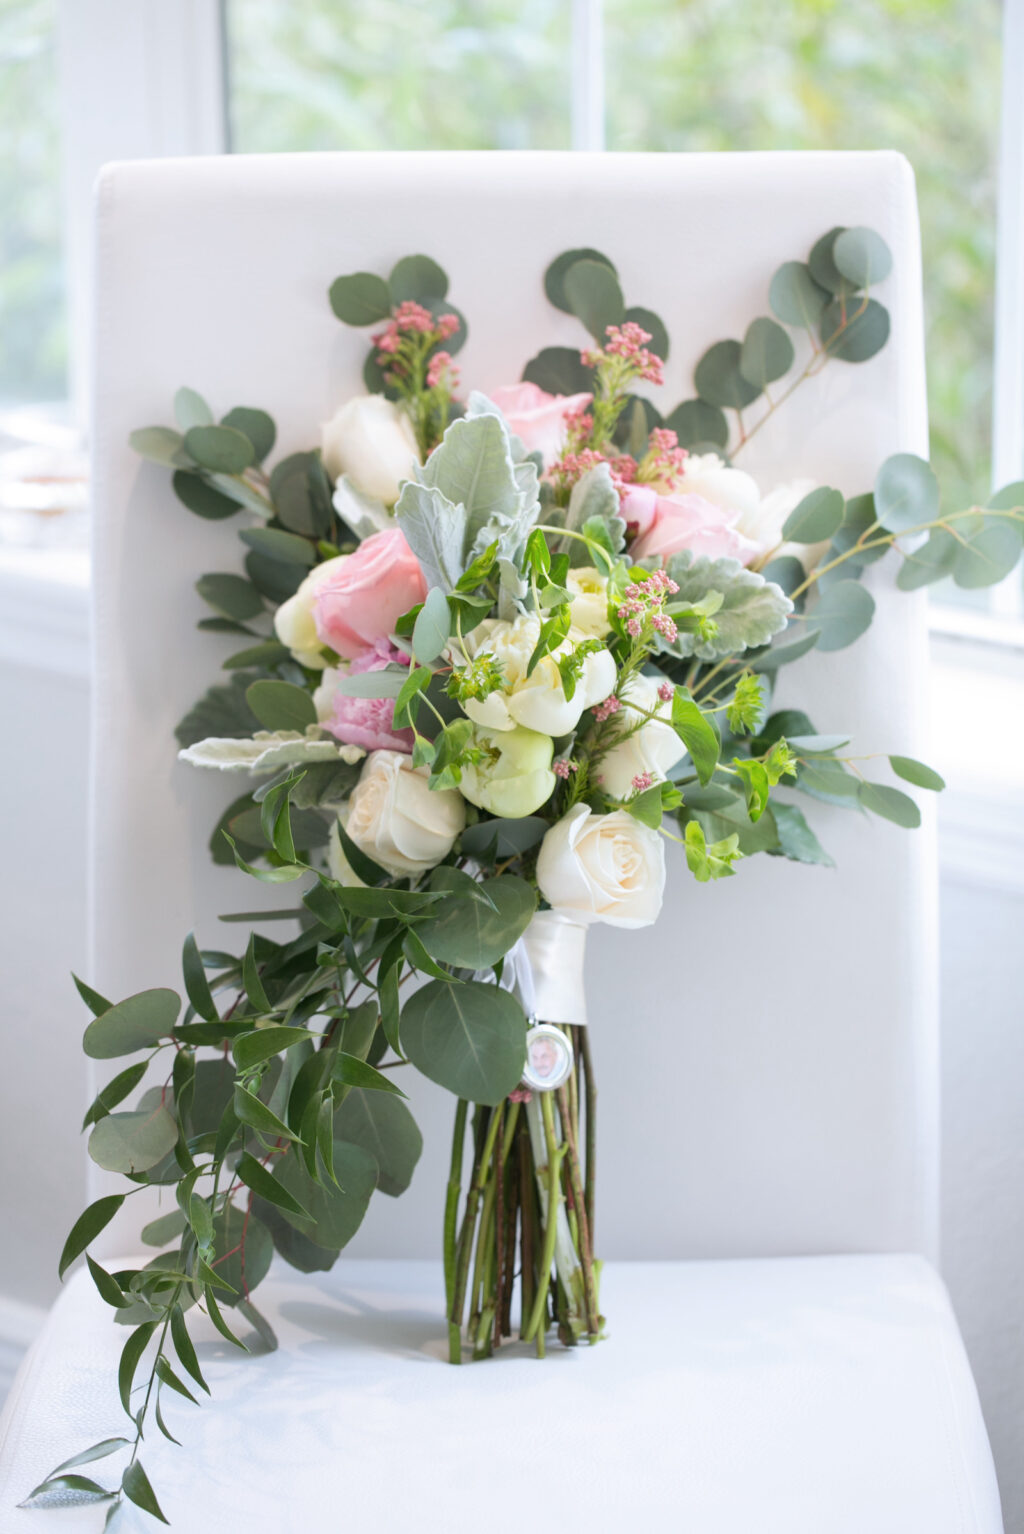 Bridal Bouquet with White and Pink Roses and Fresh Eucalyptus